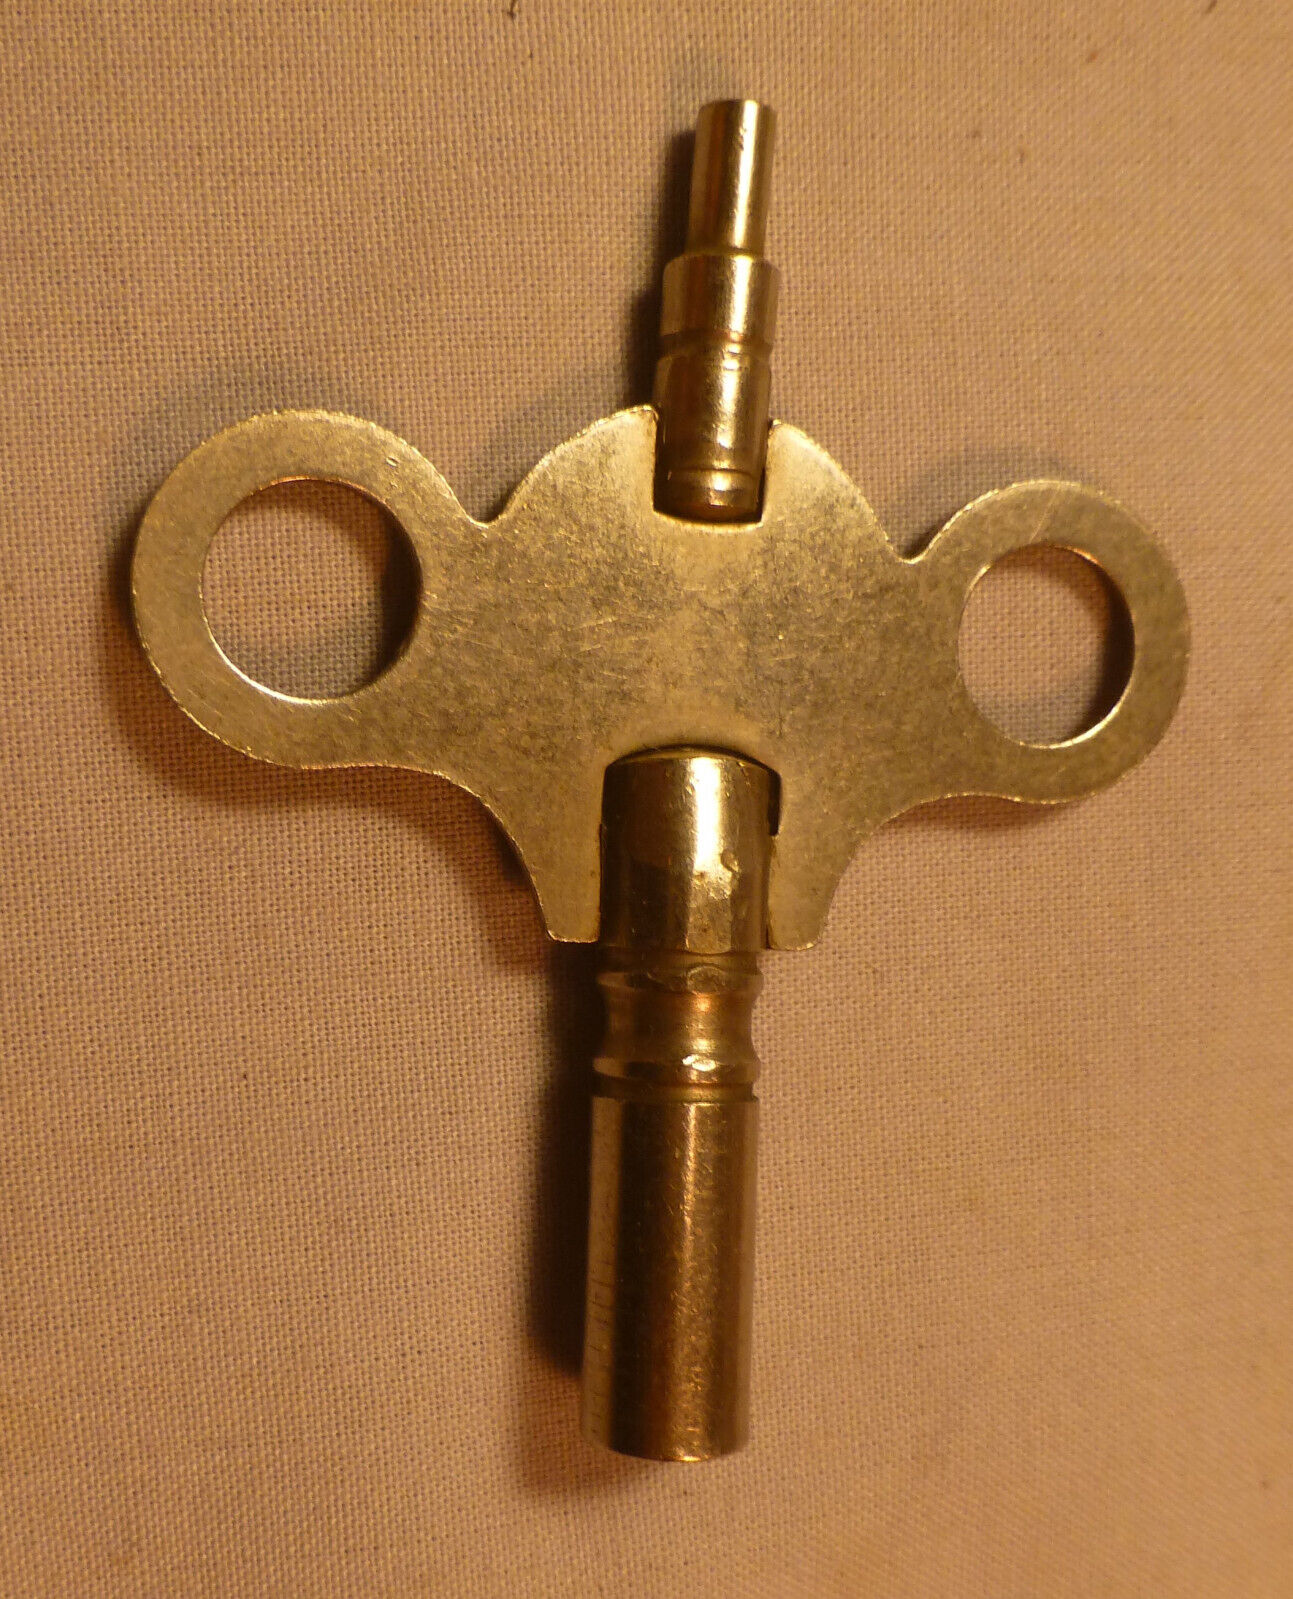 A Clock Key for SESSIONS  Mantle Clocks  -BEST OFFER-